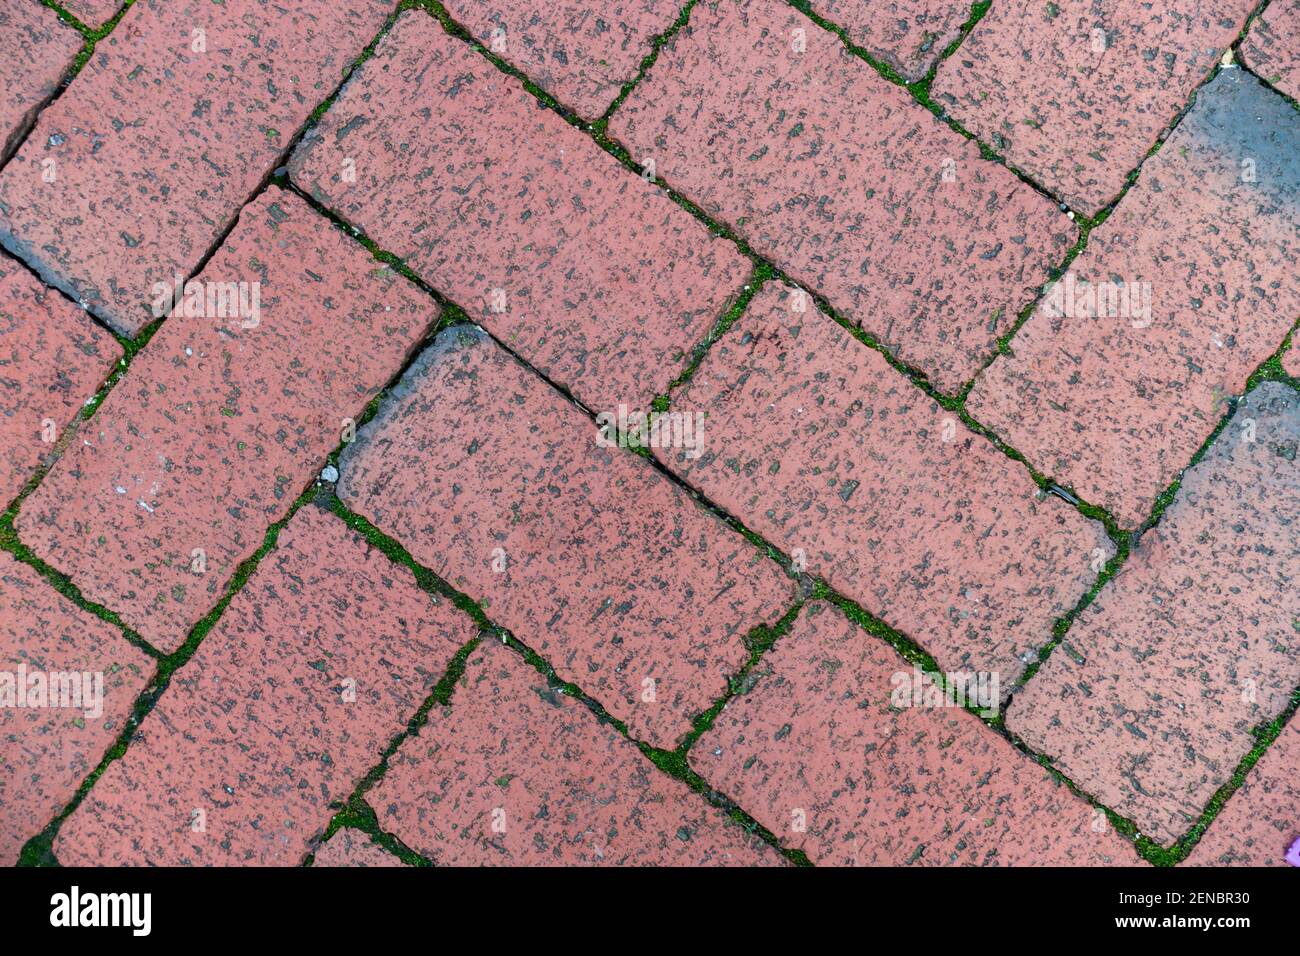 Block paving.flooring laid out in a Herringbone design, Stock Photo